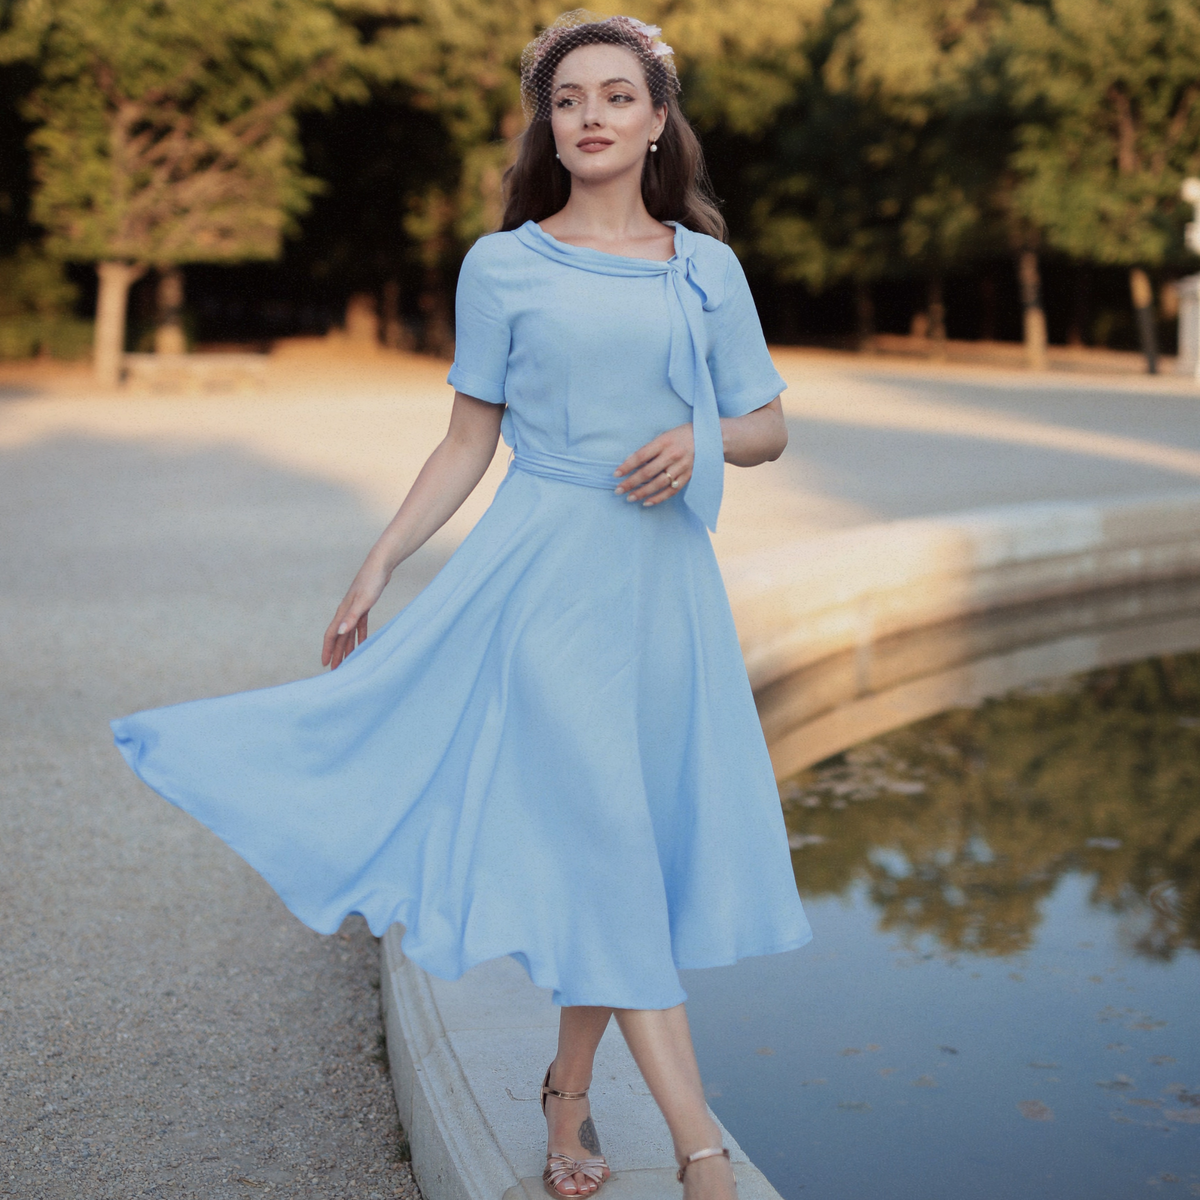 Model wears a 1940s vintage style short sleeve dress with a side tie-neck and a tie-waist belt. This dress is in a powder blue colour and has a a-line skirt and is designed to finish below the knee.